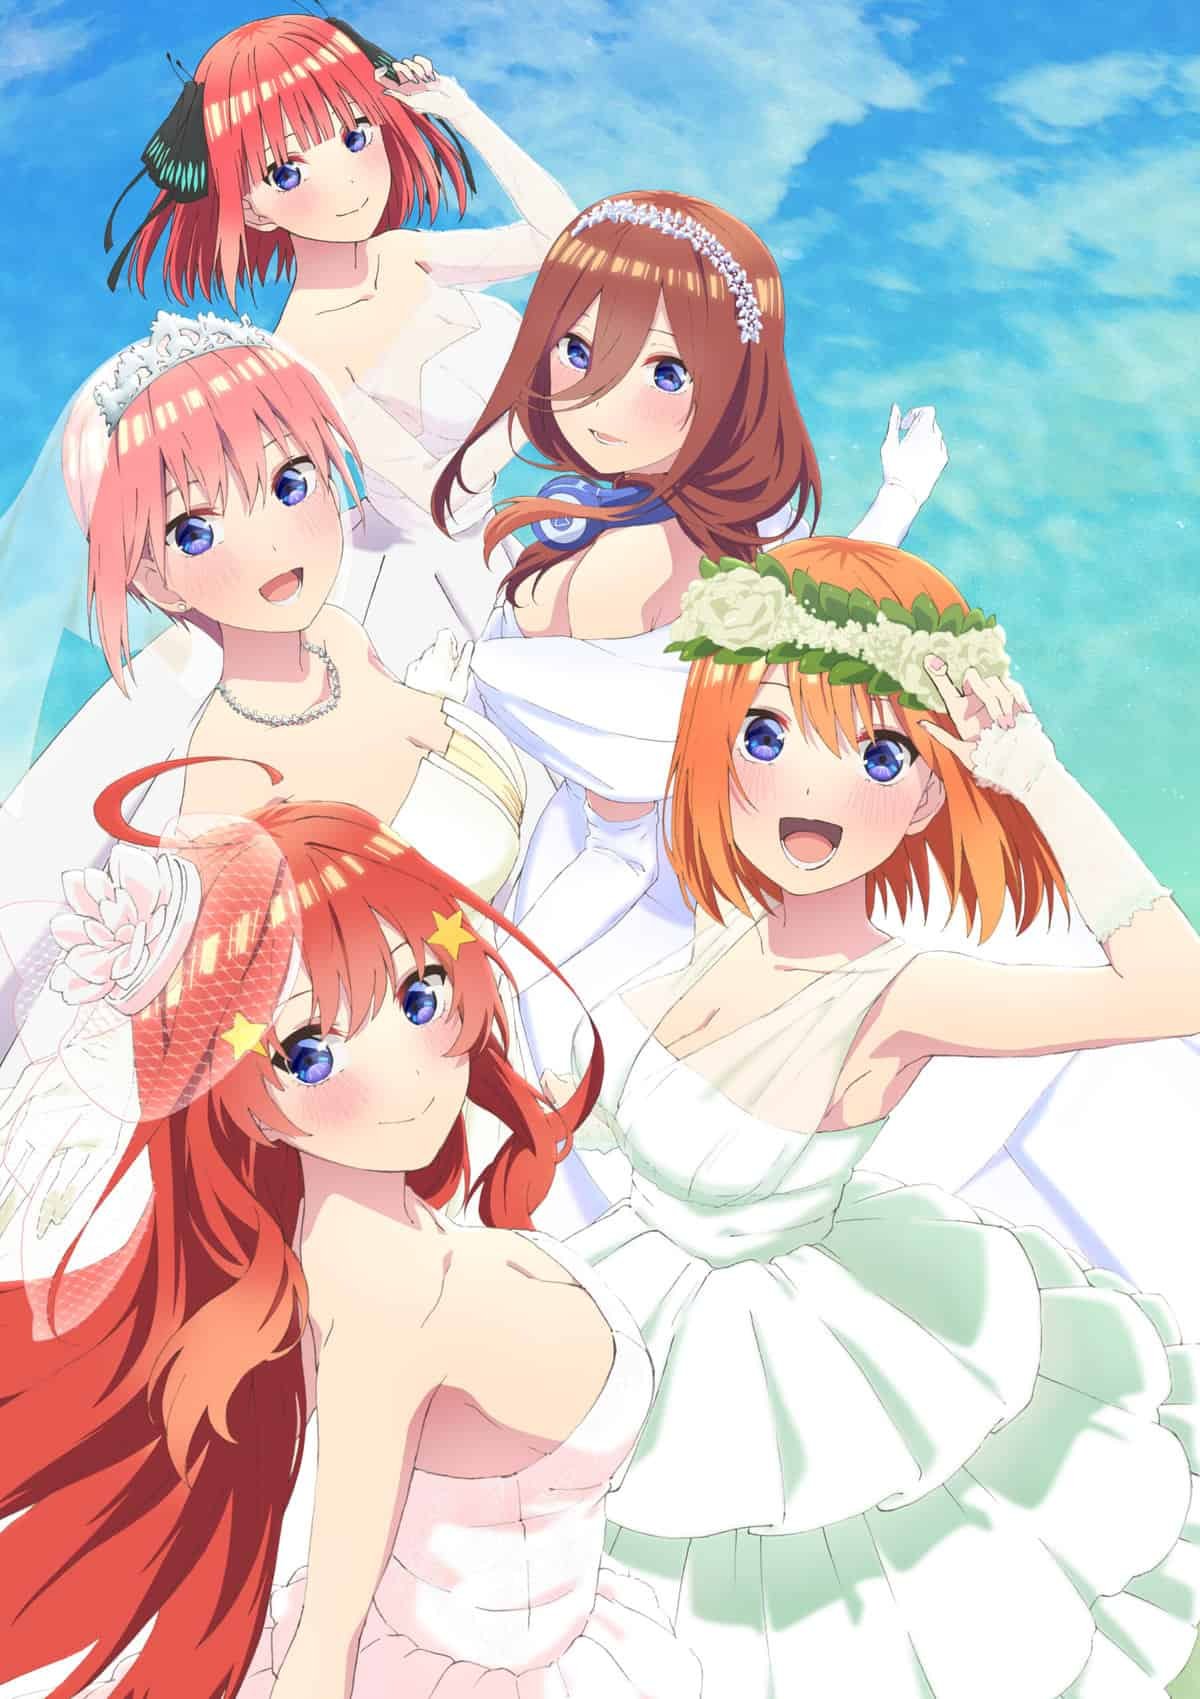 The Quintessential Quintuplets Put On Their Wedding Gowns in New Anime  Movie Visual - Crunchyroll News